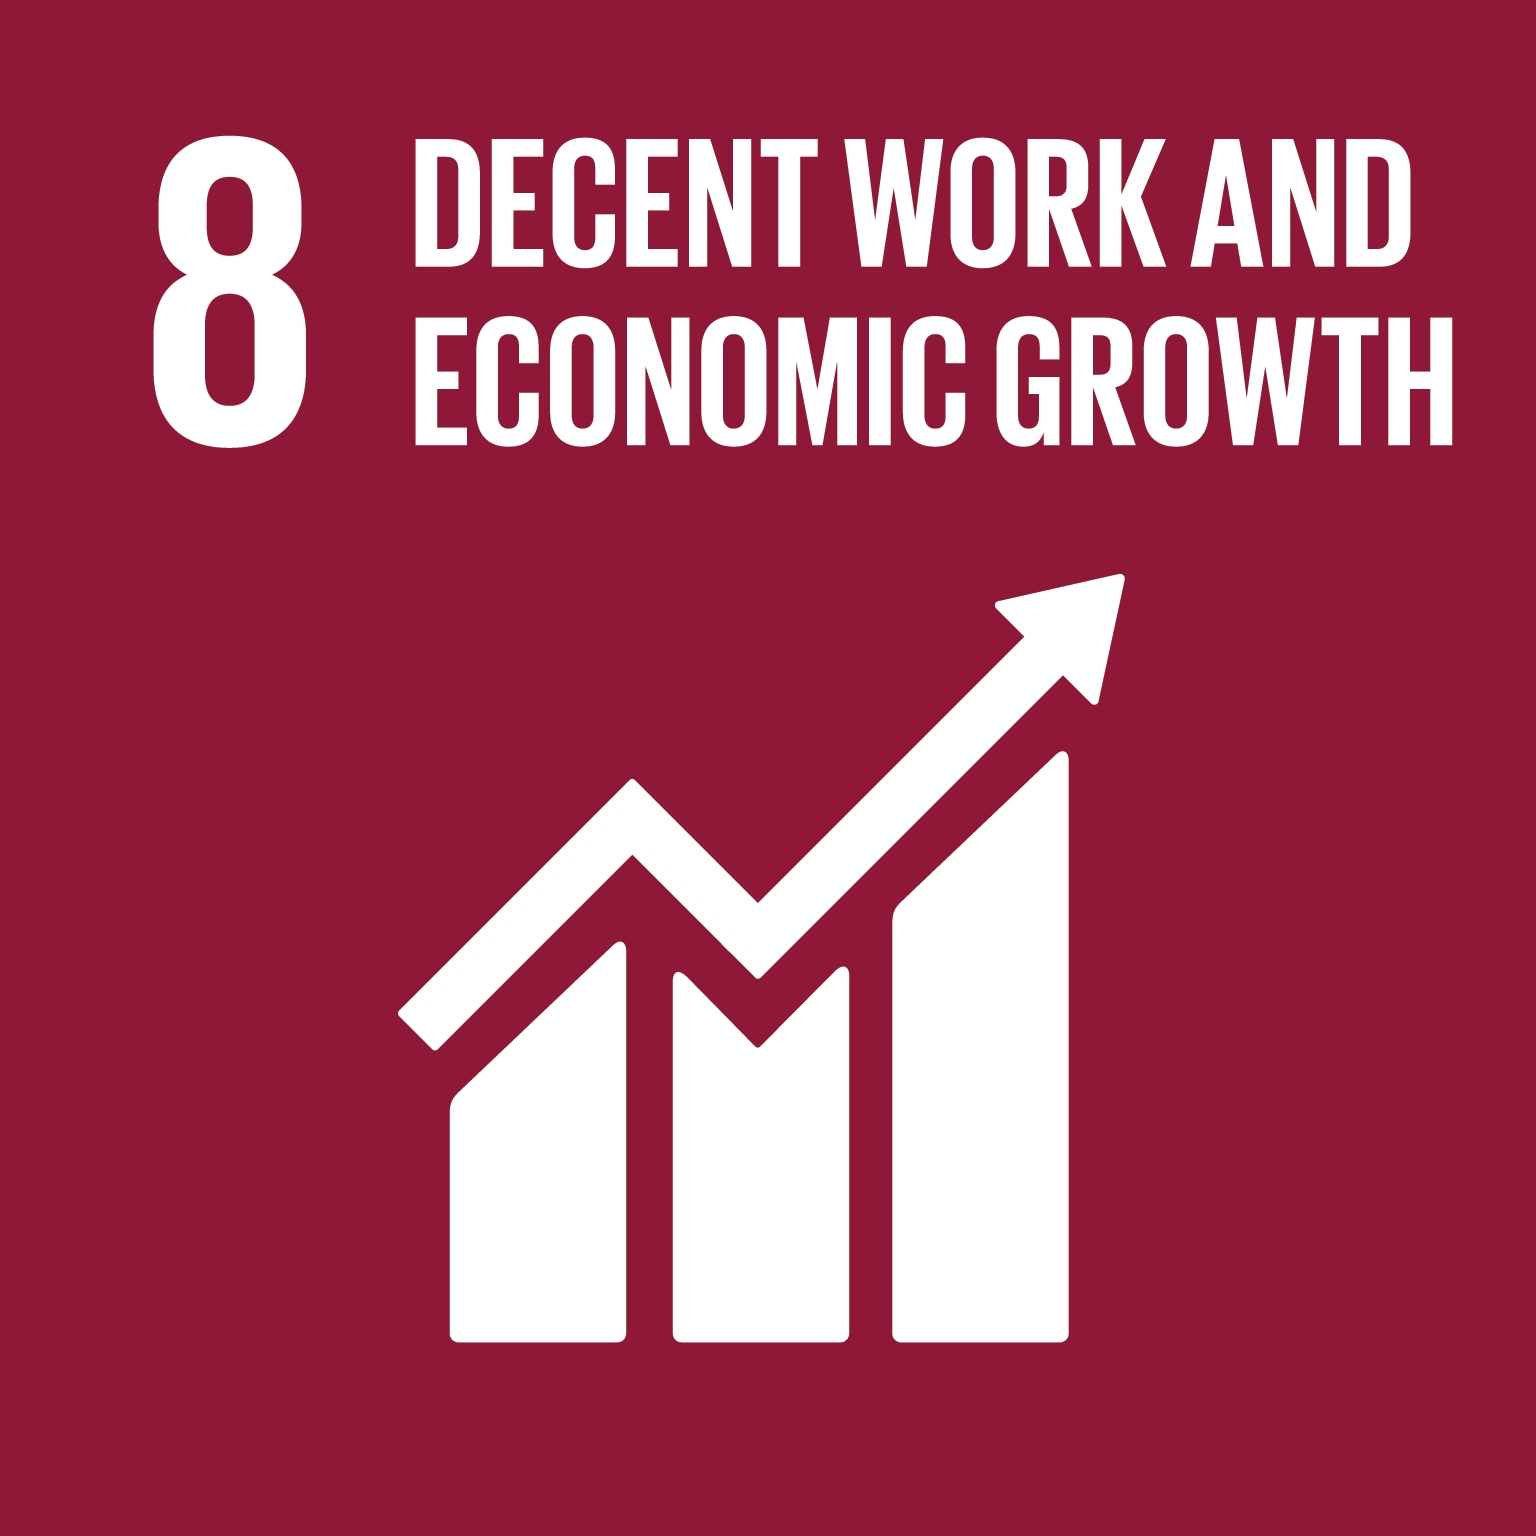 8 DECENT WORK AND ECONONMIC GROWTH